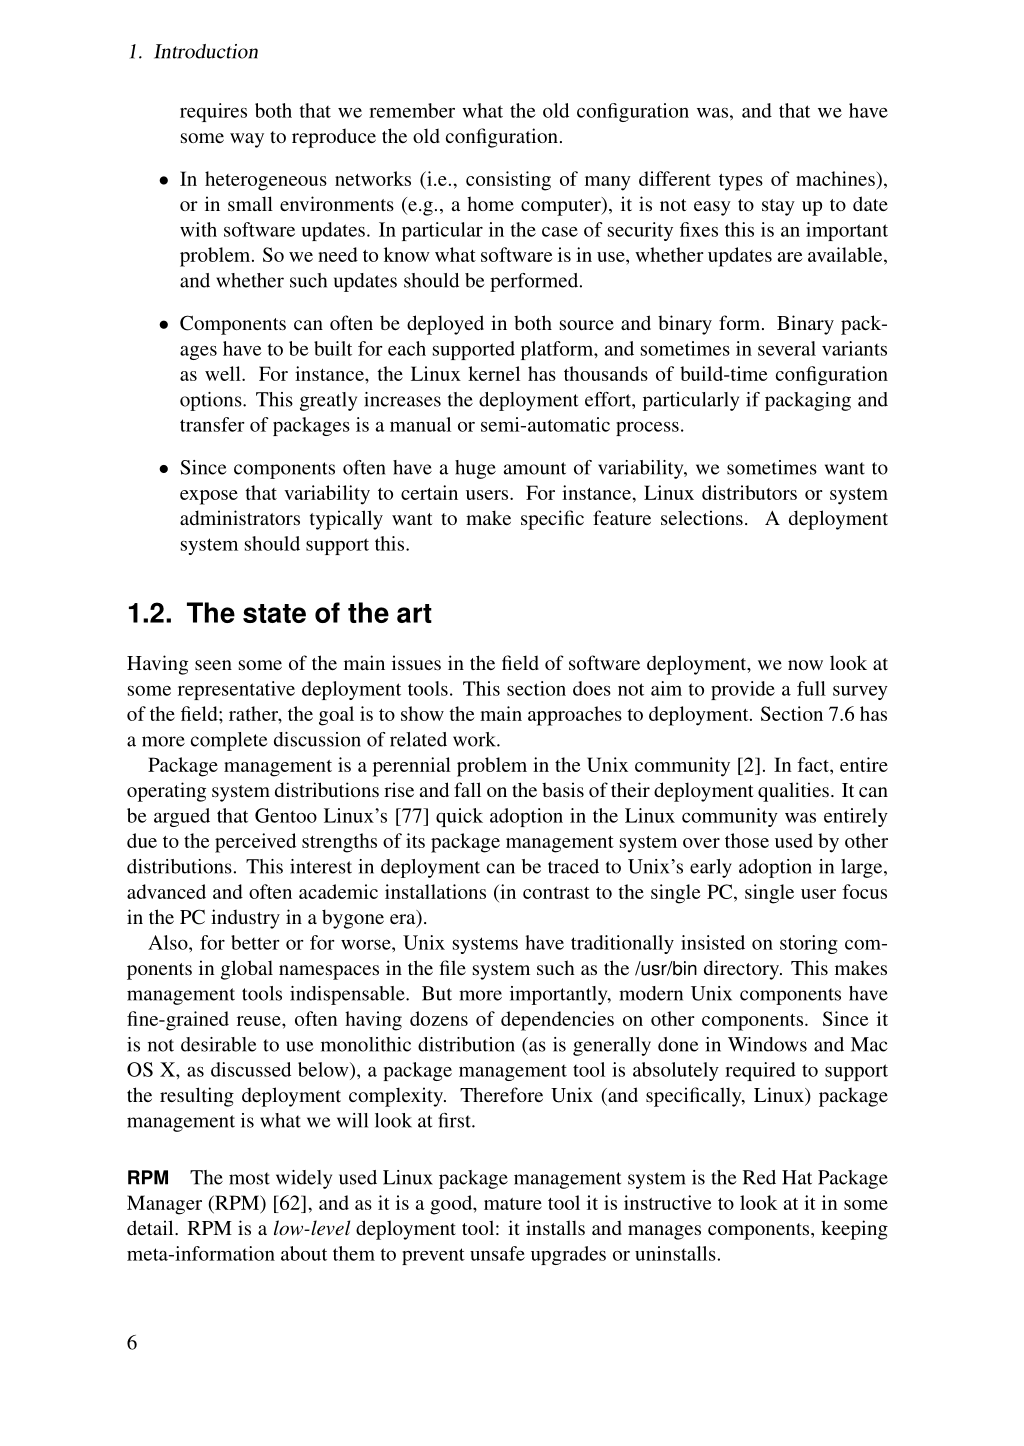 page 14